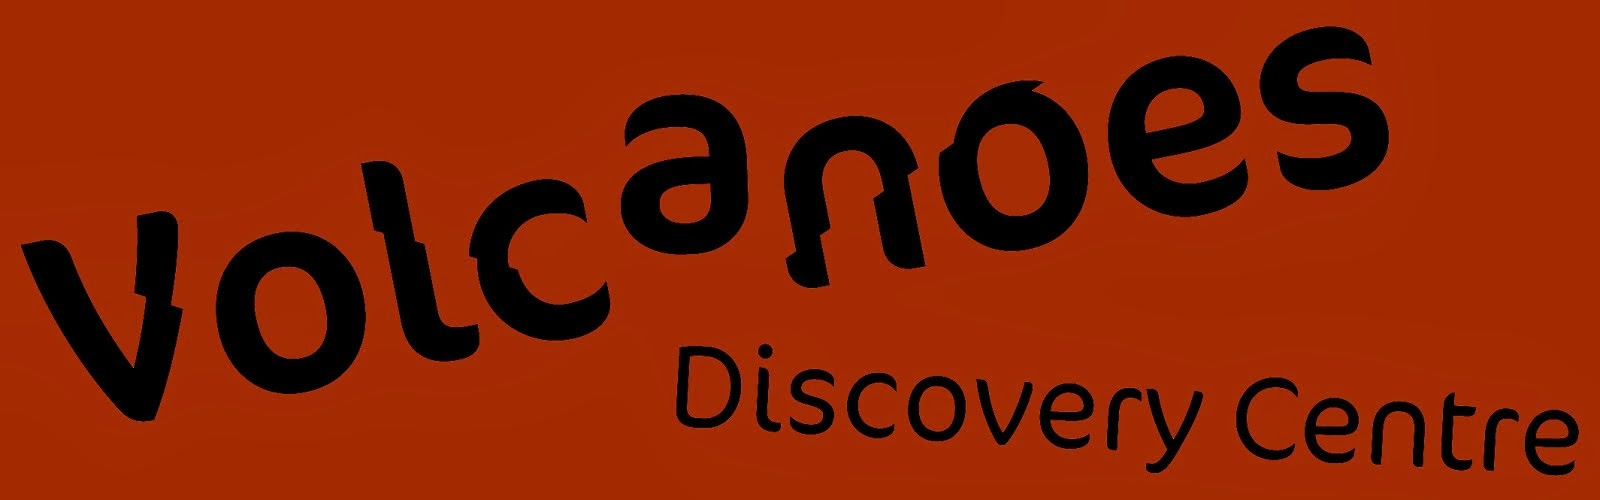 Volcanoes Discovery Centre